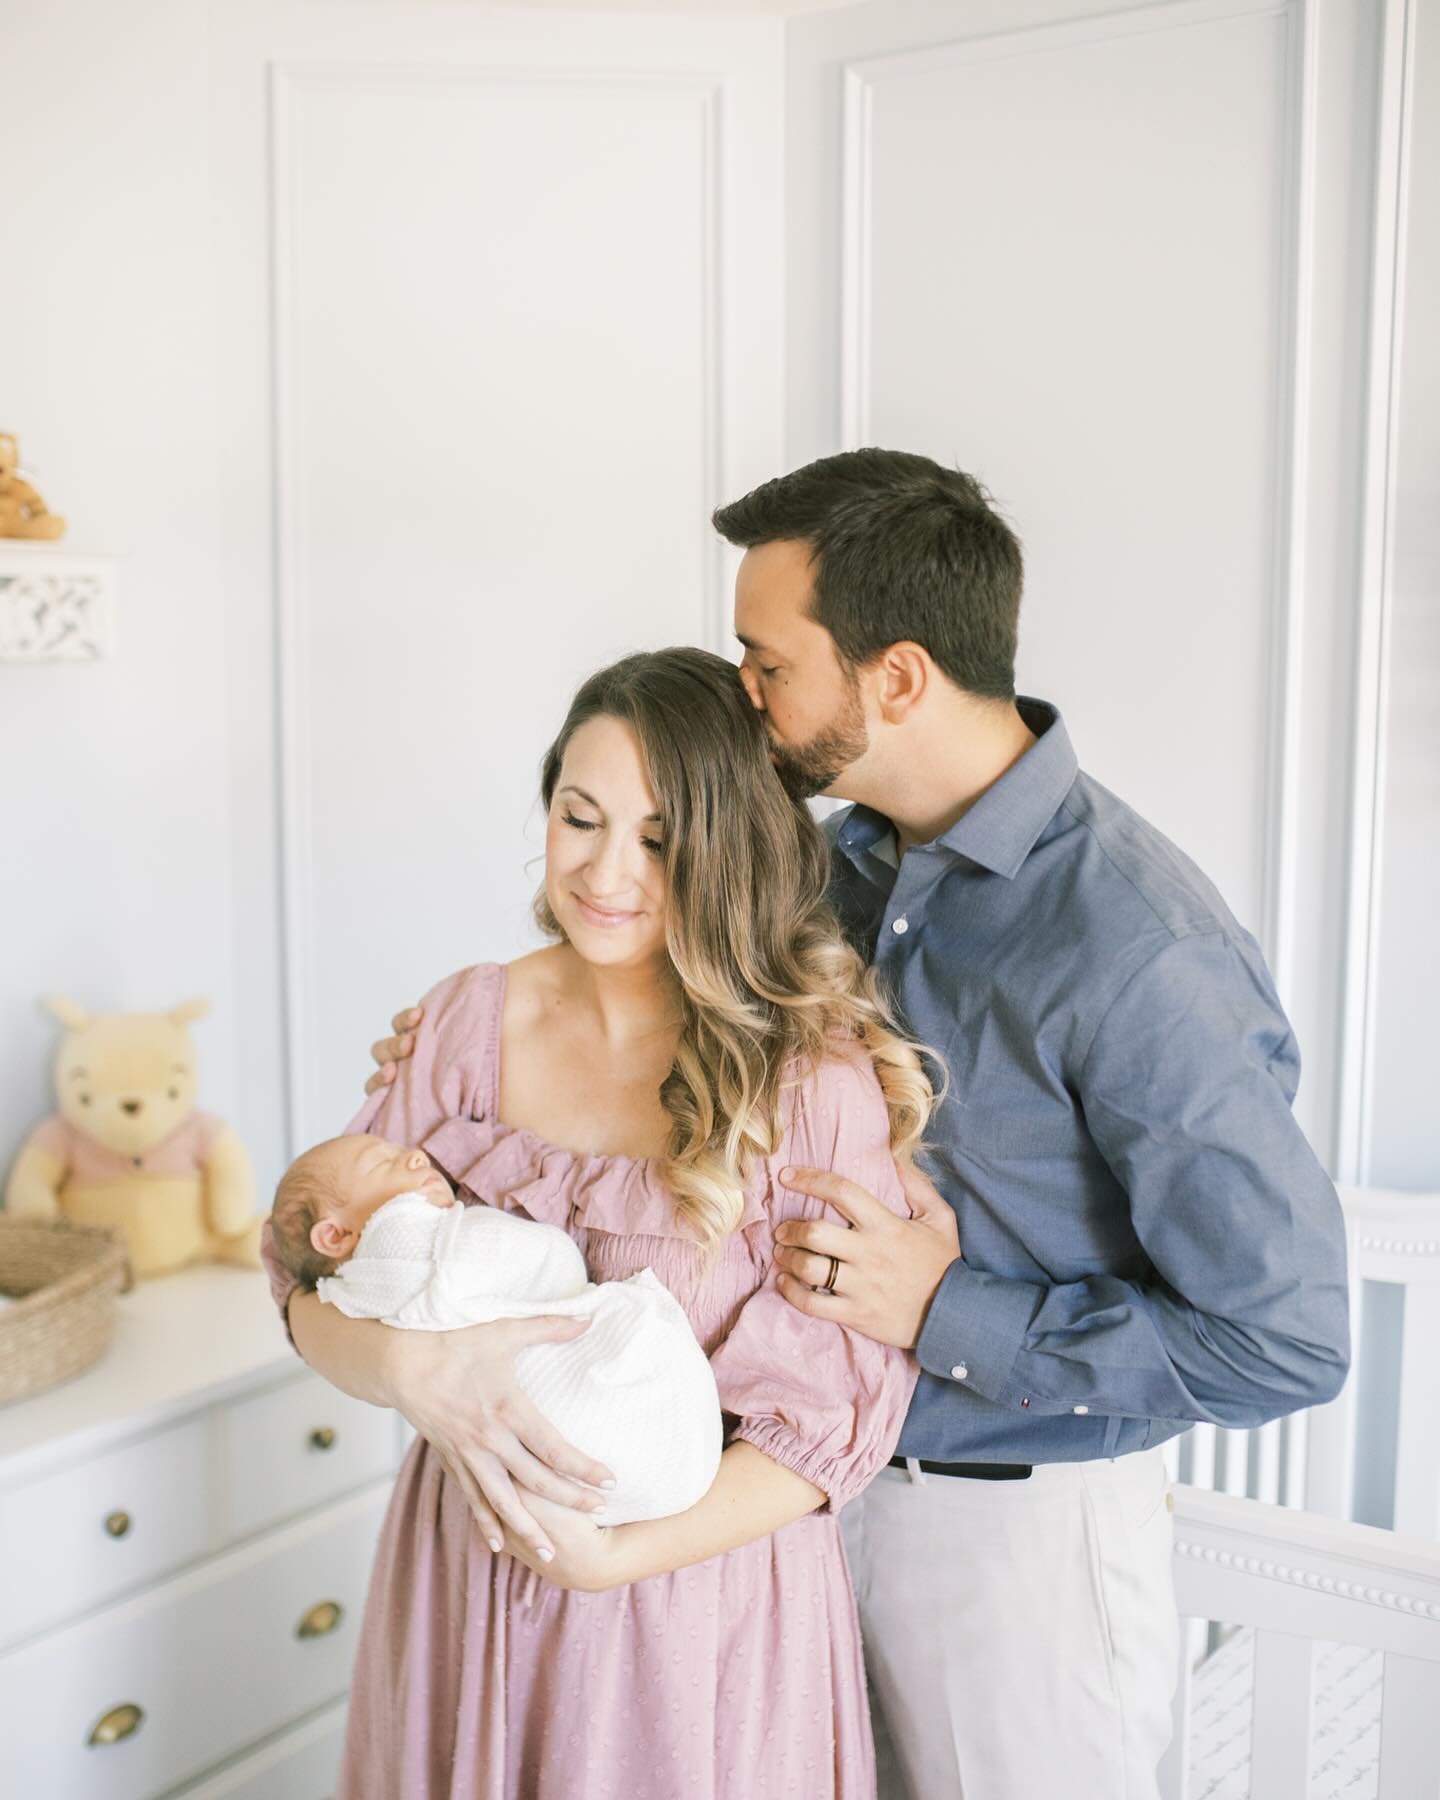 I got to hang out with this sweet family, again!! Baby #2!!! It&rsquo;s been so great to watch their family grow. Such amazing parents. 🤍 Newborn sessions with a toddler can be a bit of a struggle, but they handled it with such patience! Welcome, ba